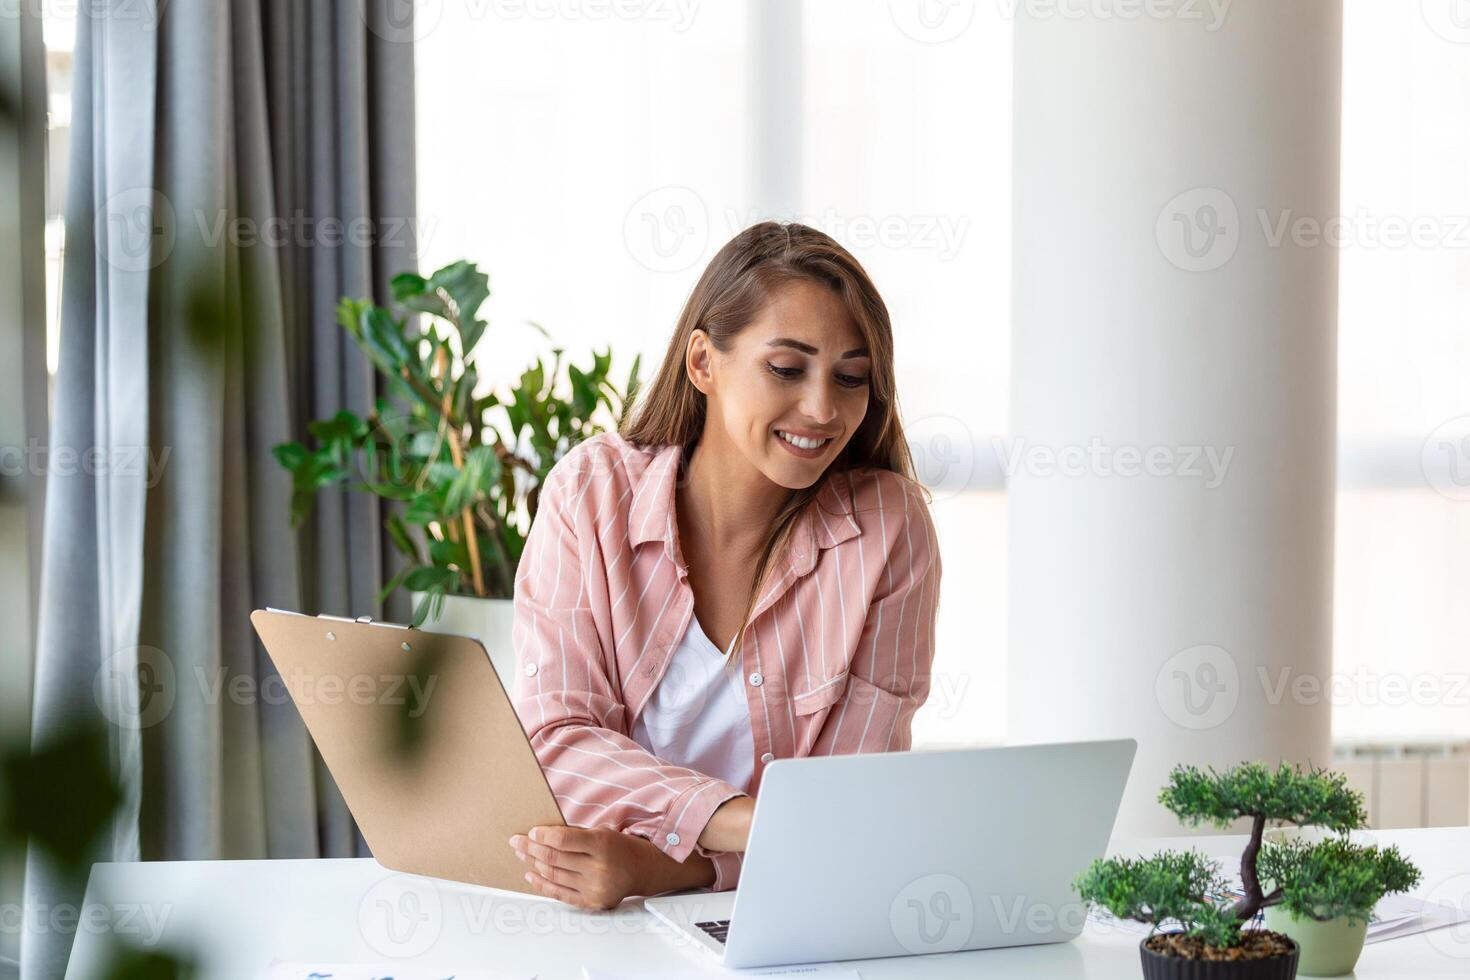 Remote job, technology and people concept - happy smiling young business woman with laptop computer and papers working at home office photo